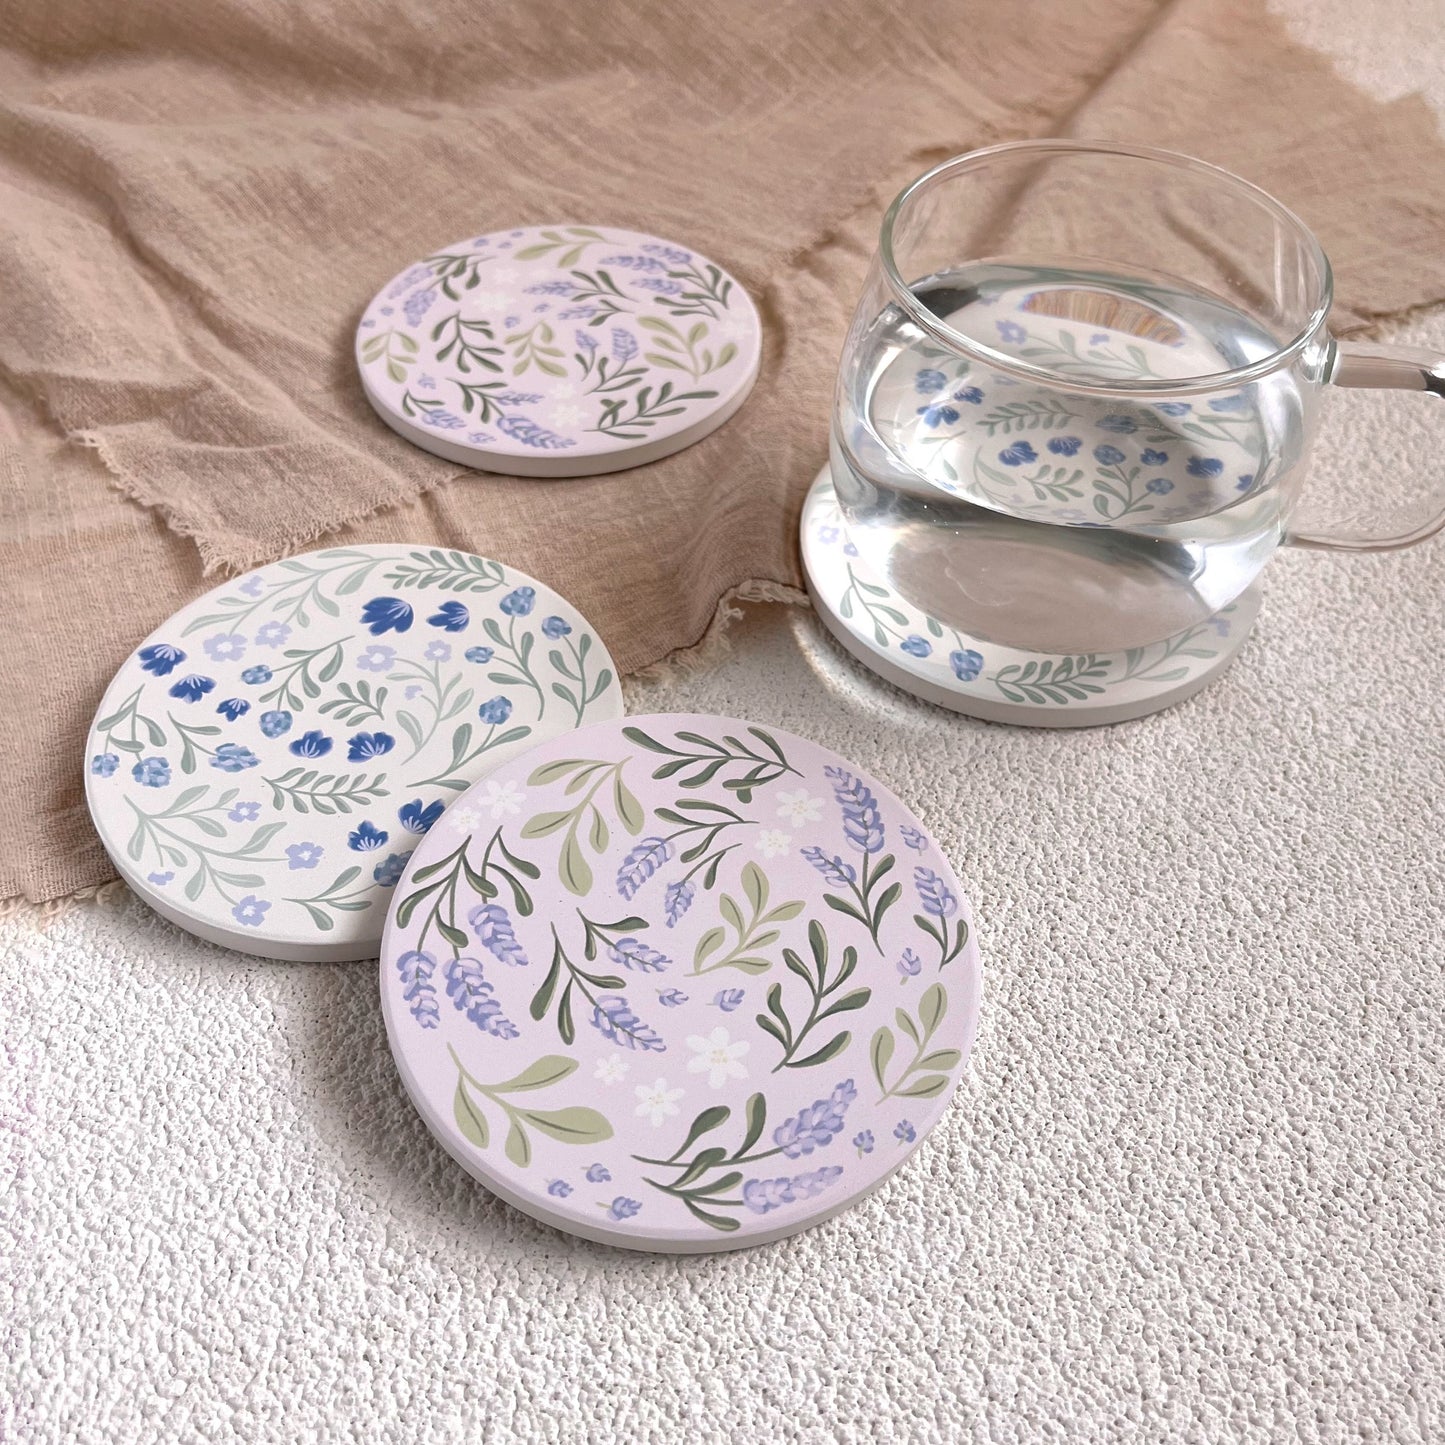 Country Meadows Diatomite Coasters